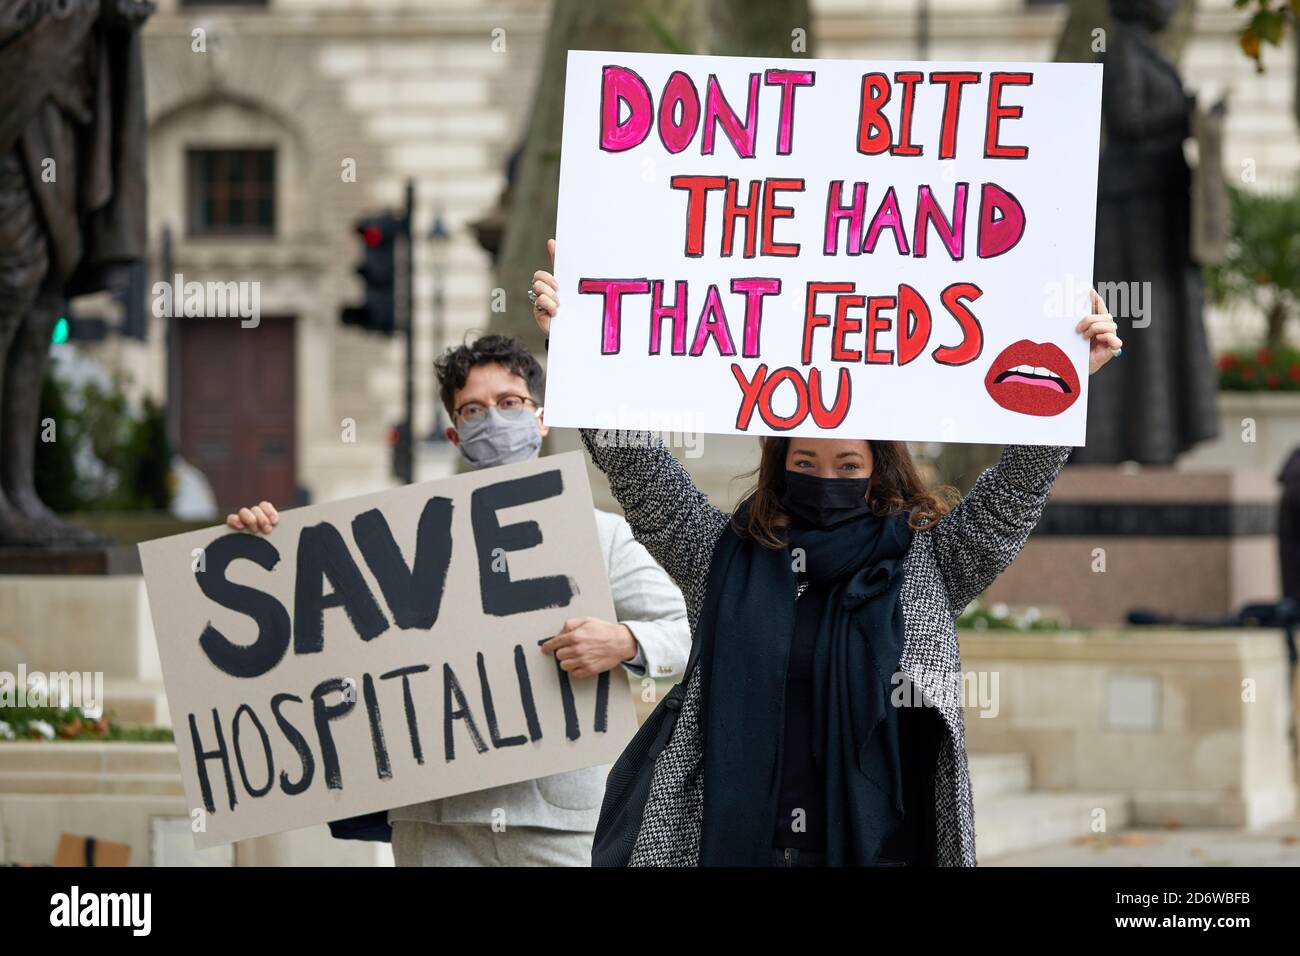 London, UK. - 19 Oct 2020: Hospitality workers protest in Parliament Square against the UK’s coronavirus restrictions, which they say will devastate their industry. Stock Photo